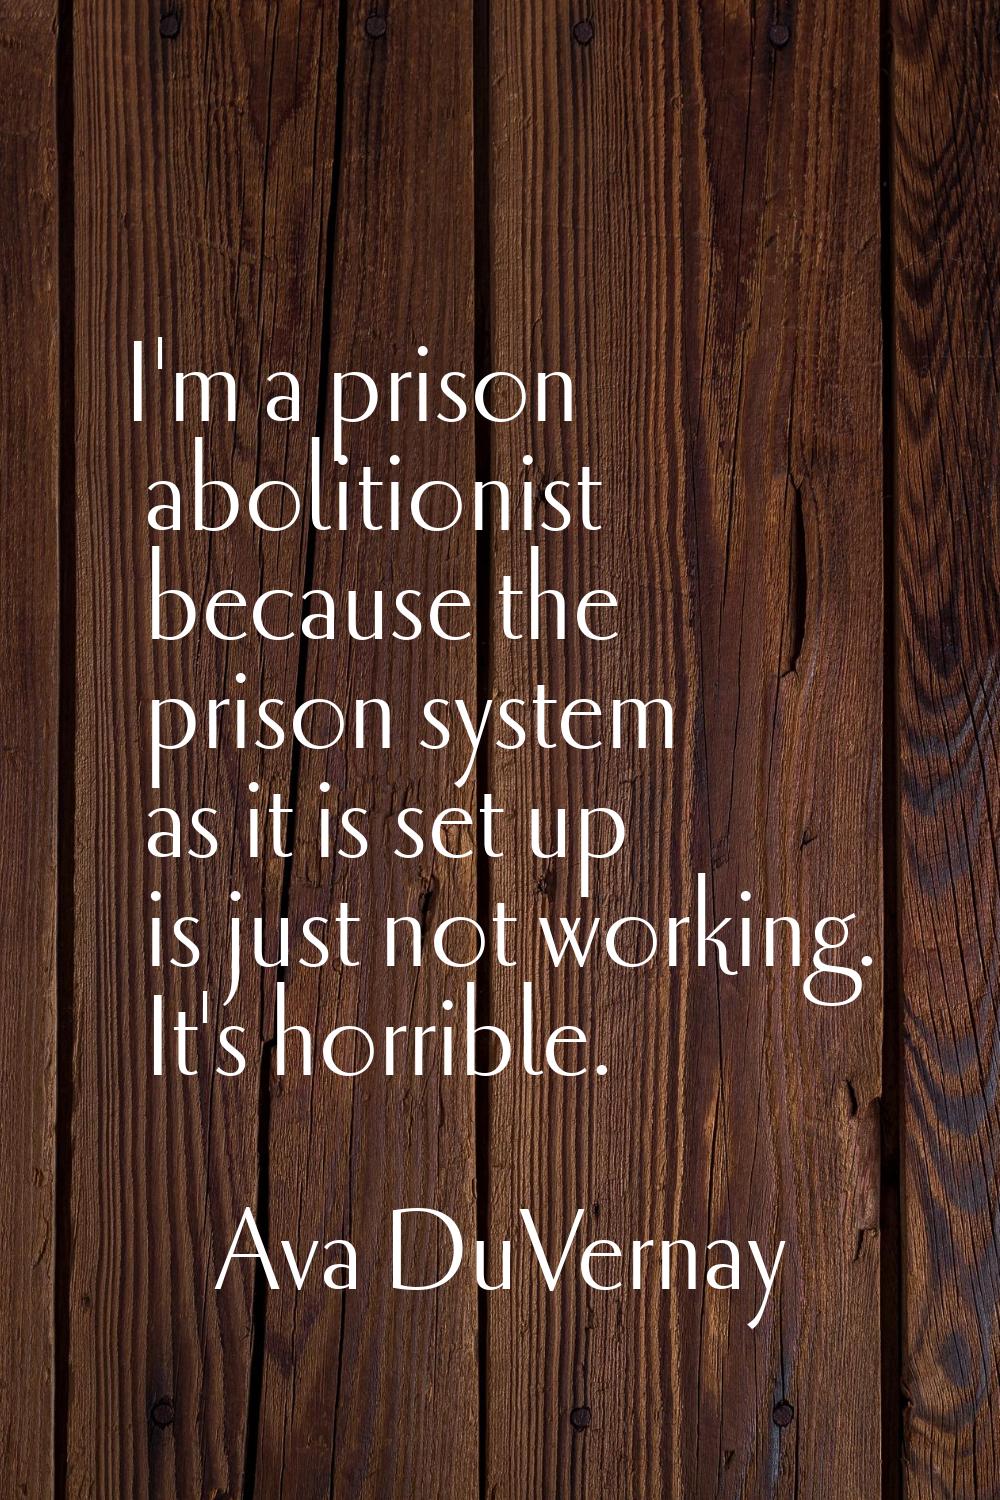 I'm a prison abolitionist because the prison system as it is set up is just not working. It's horri